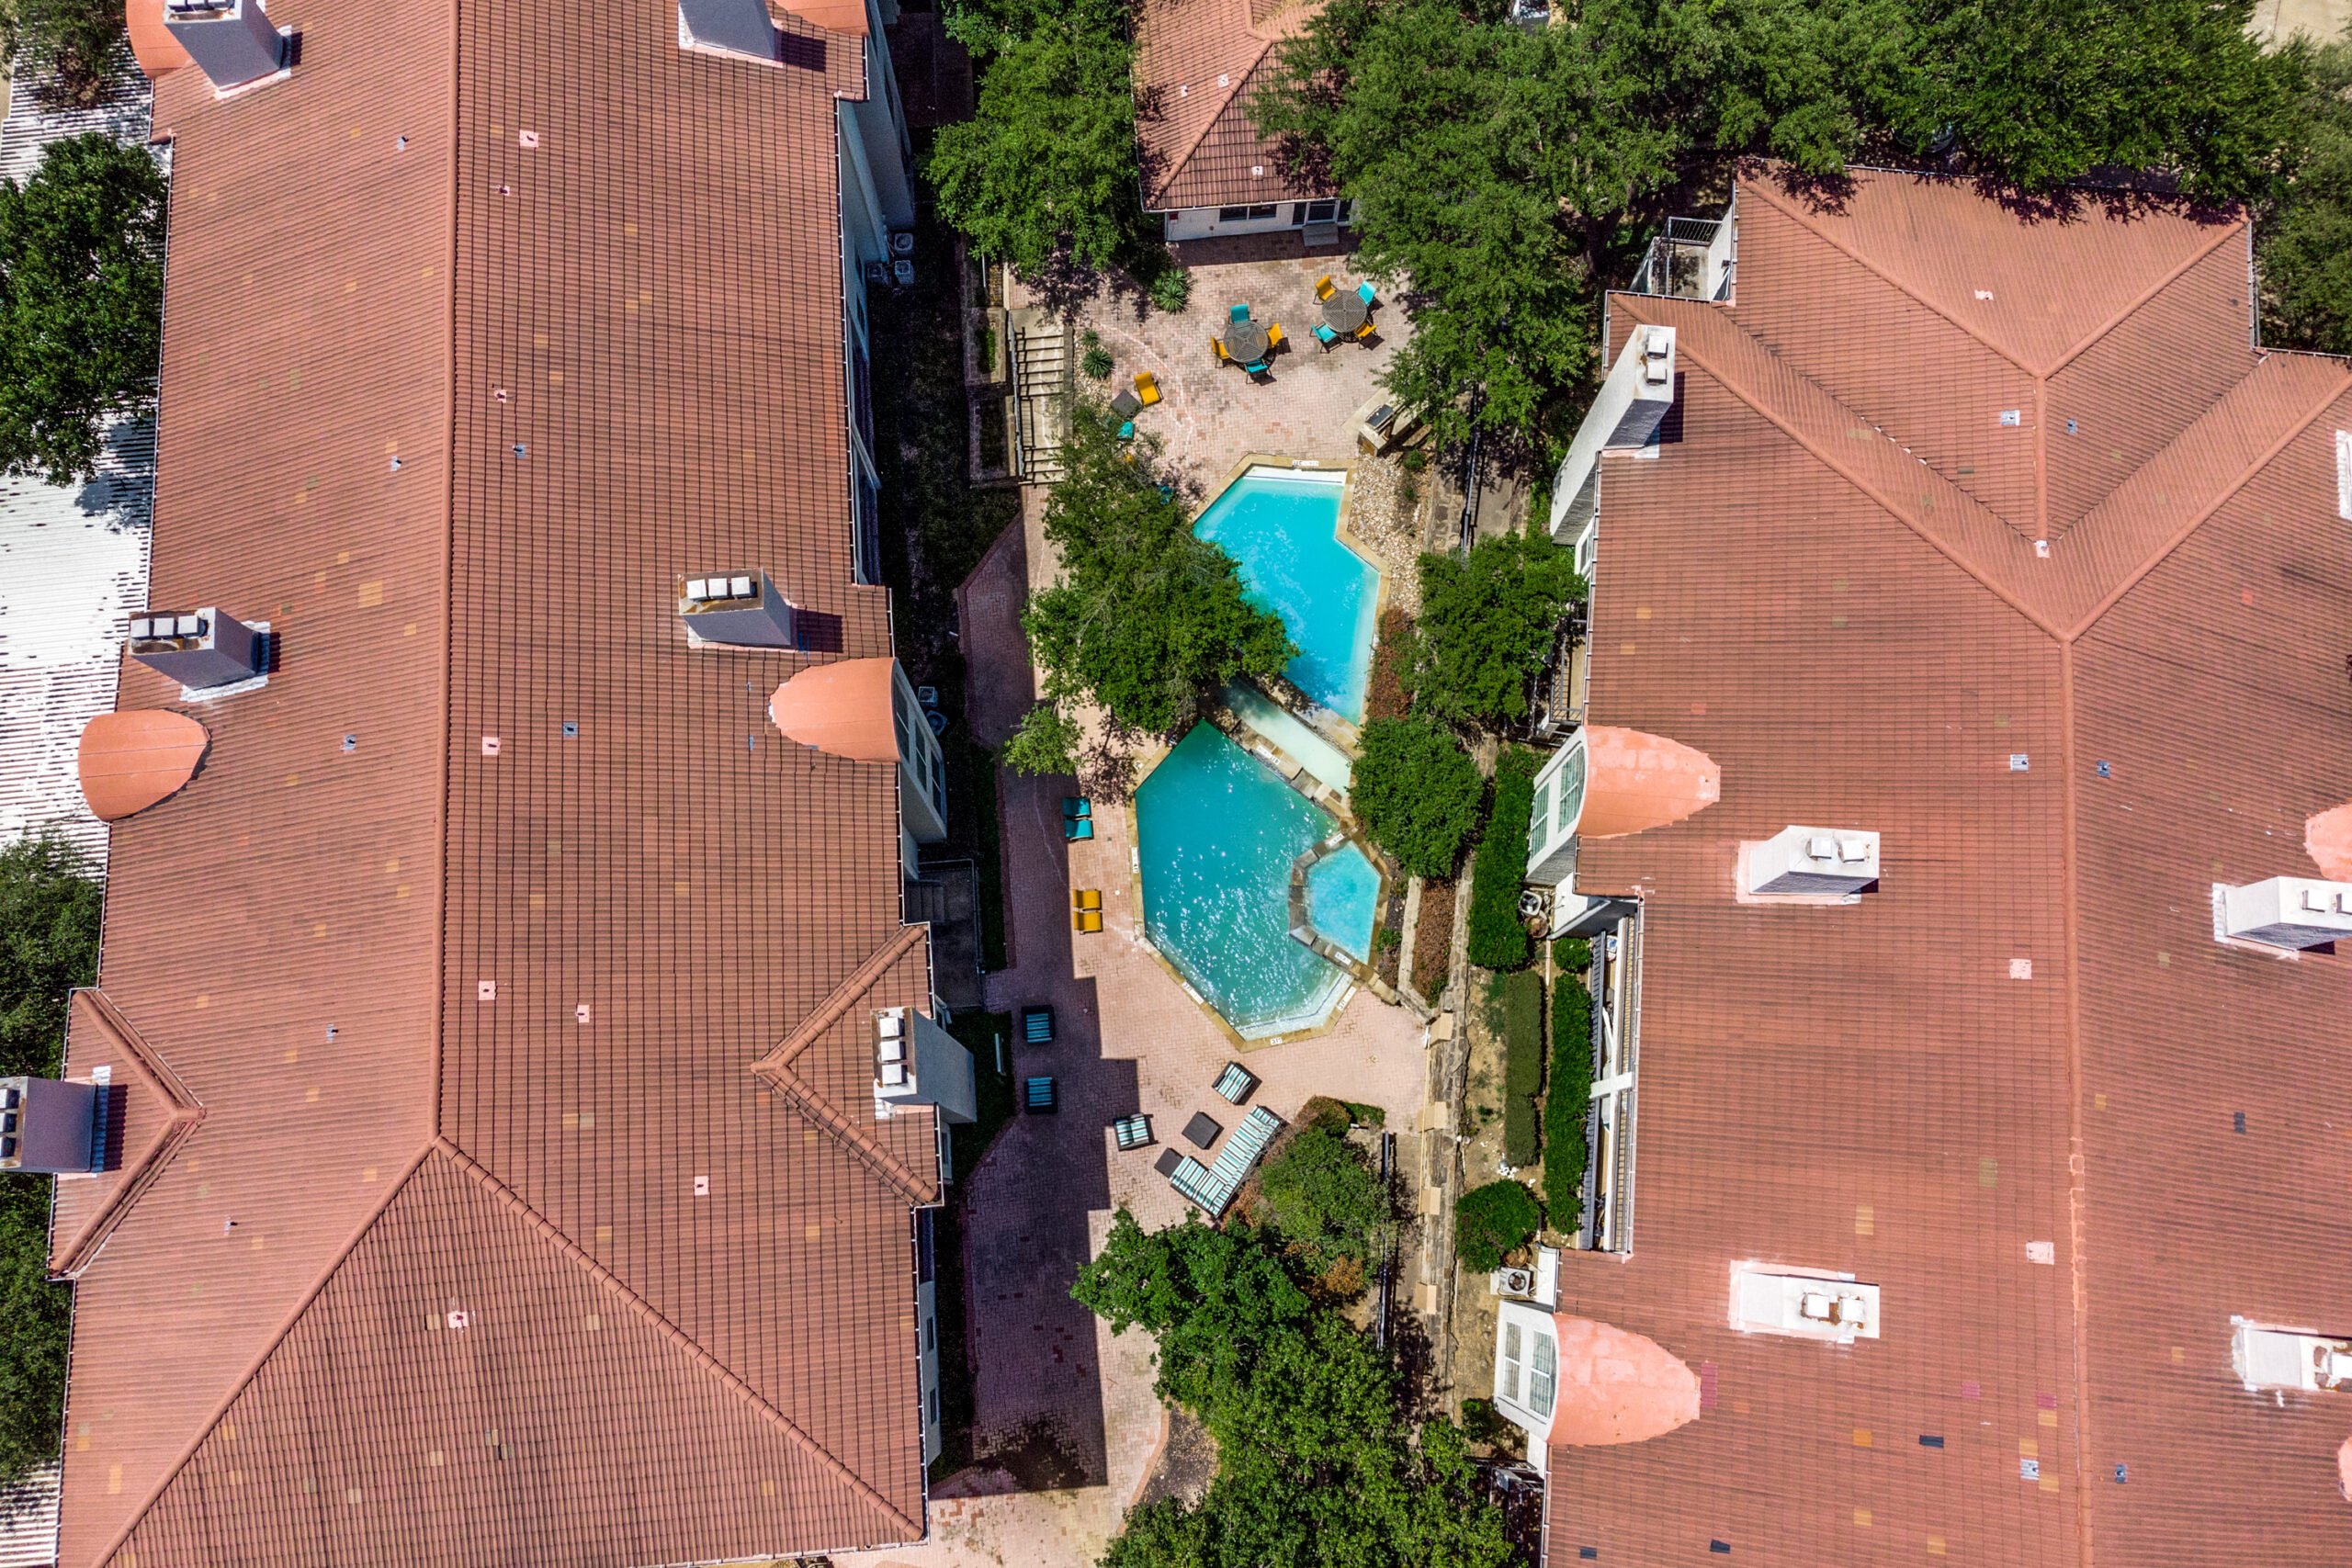 Ariel photo of the pool and surrounding buildings